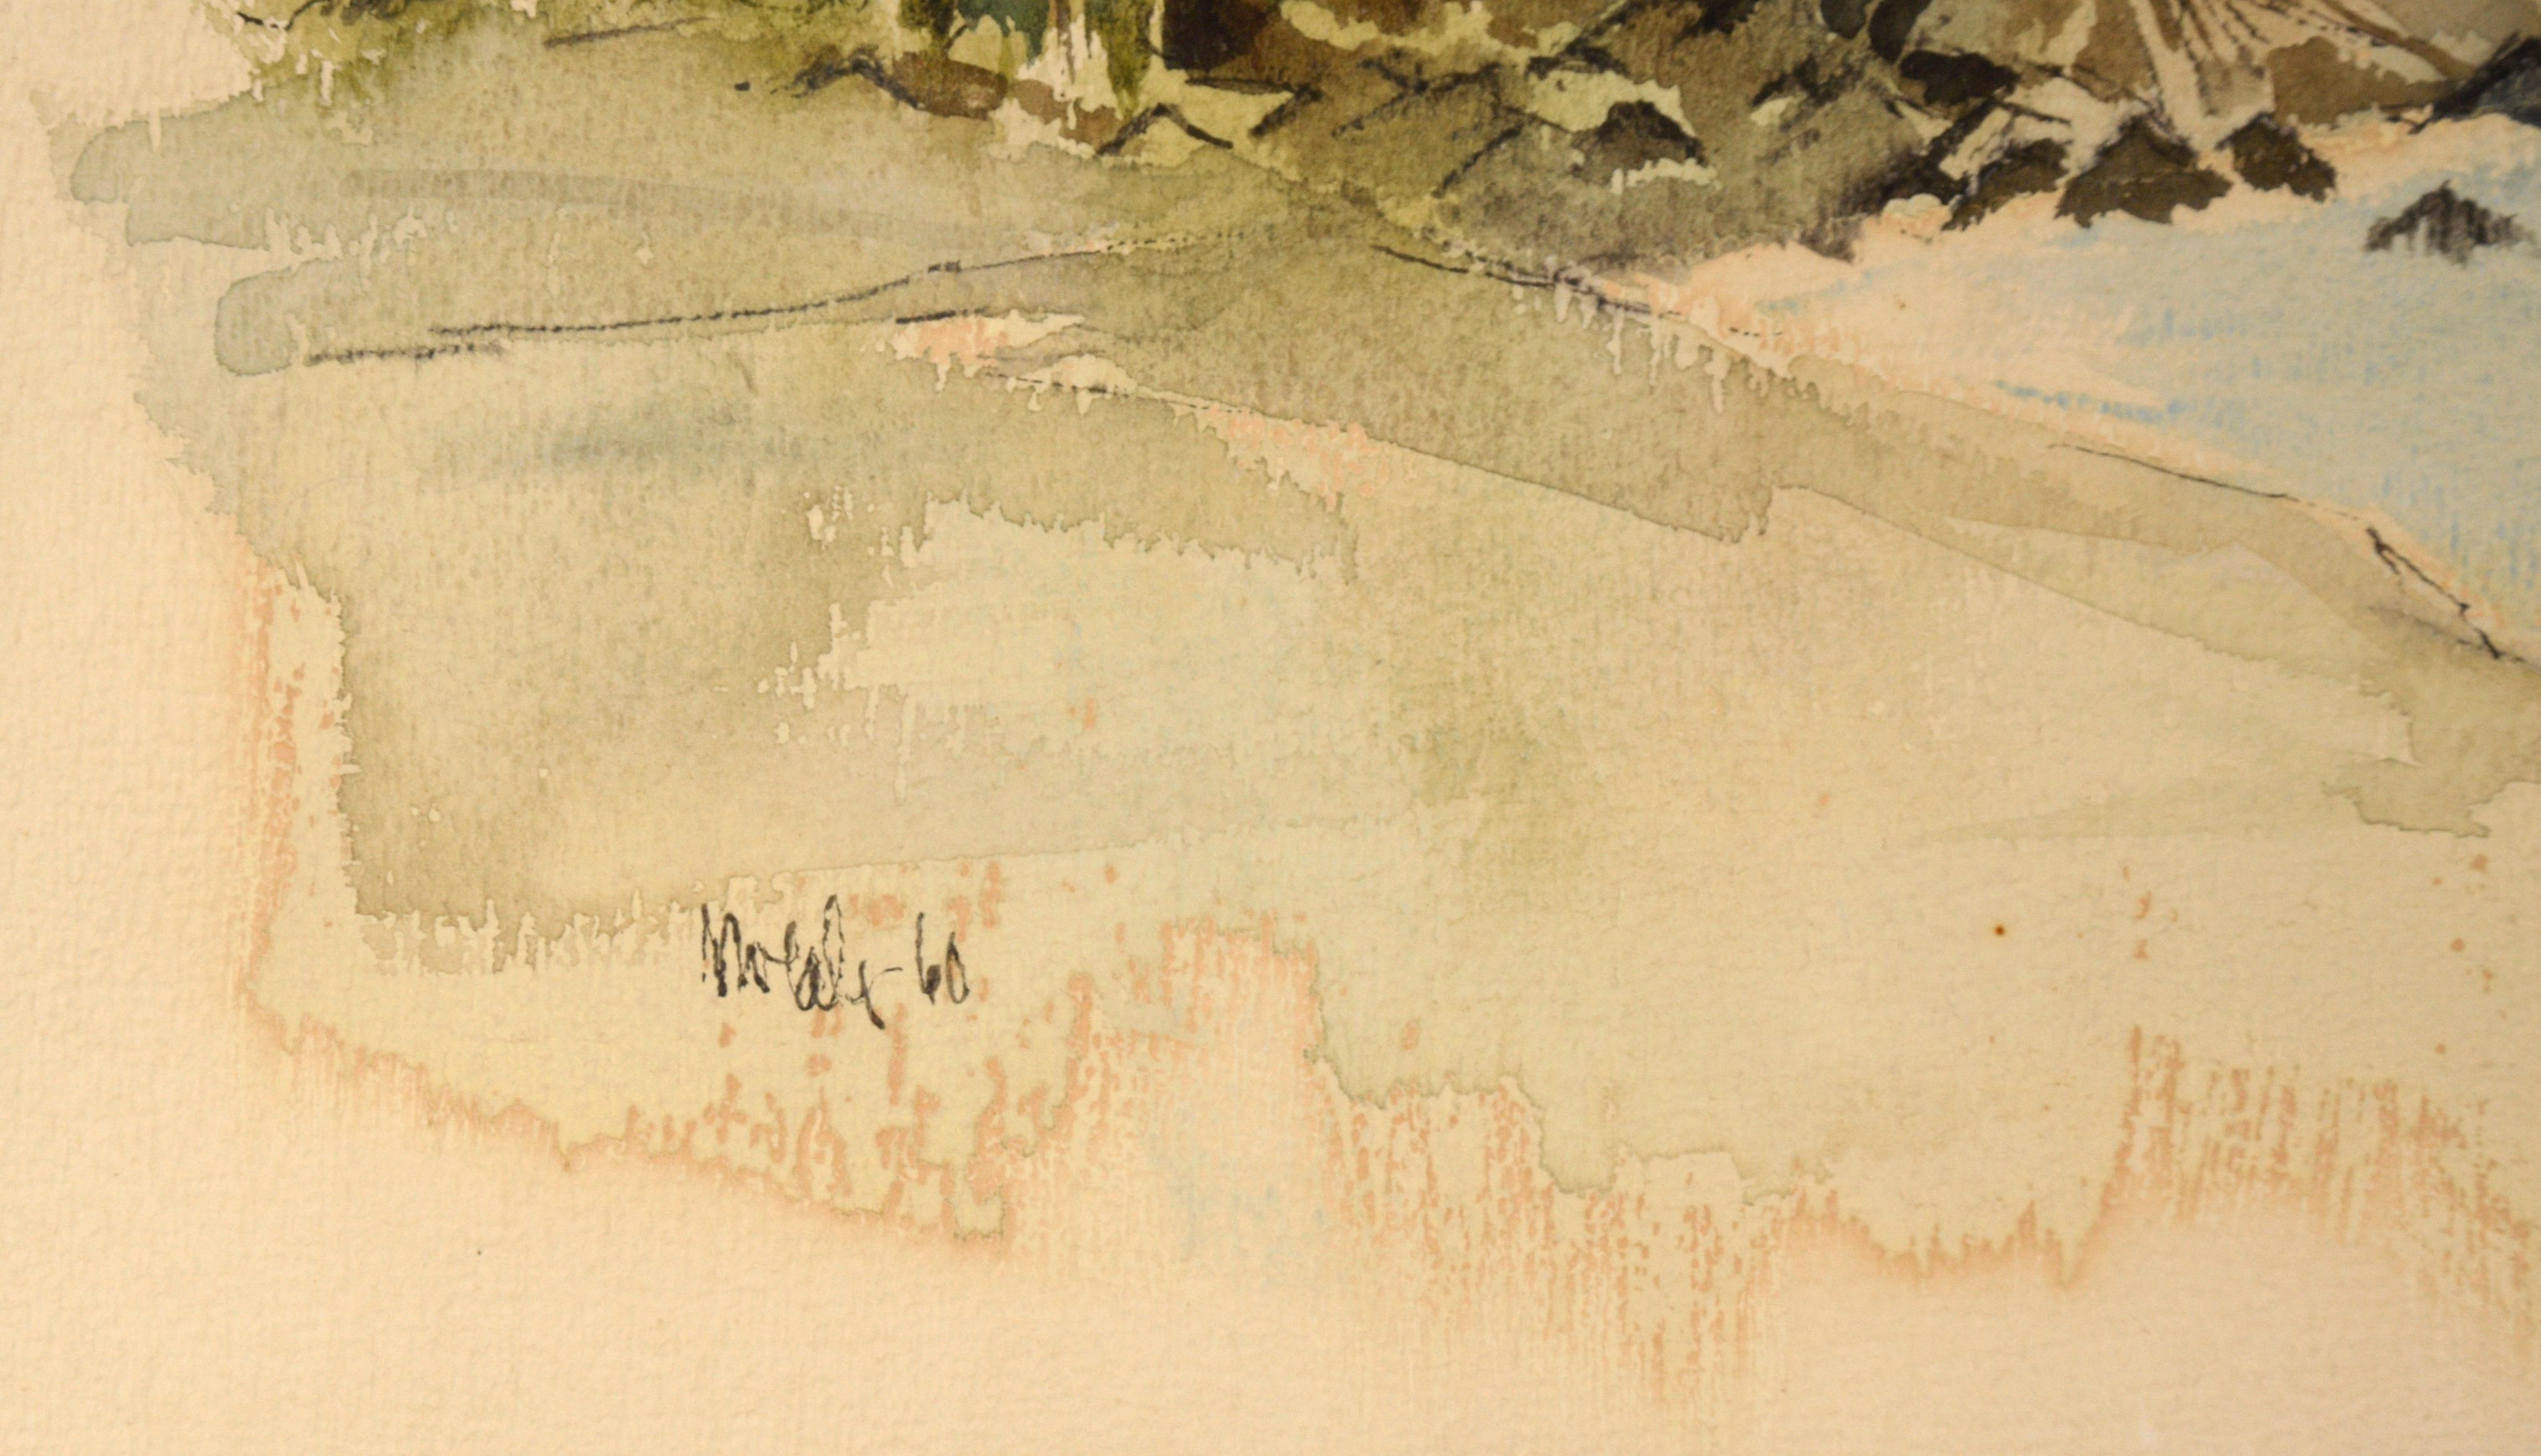 Hawaiian Tropical Beach and Mountains - Watercolor on Paper 1960 - Beige Landscape Art by Unknown